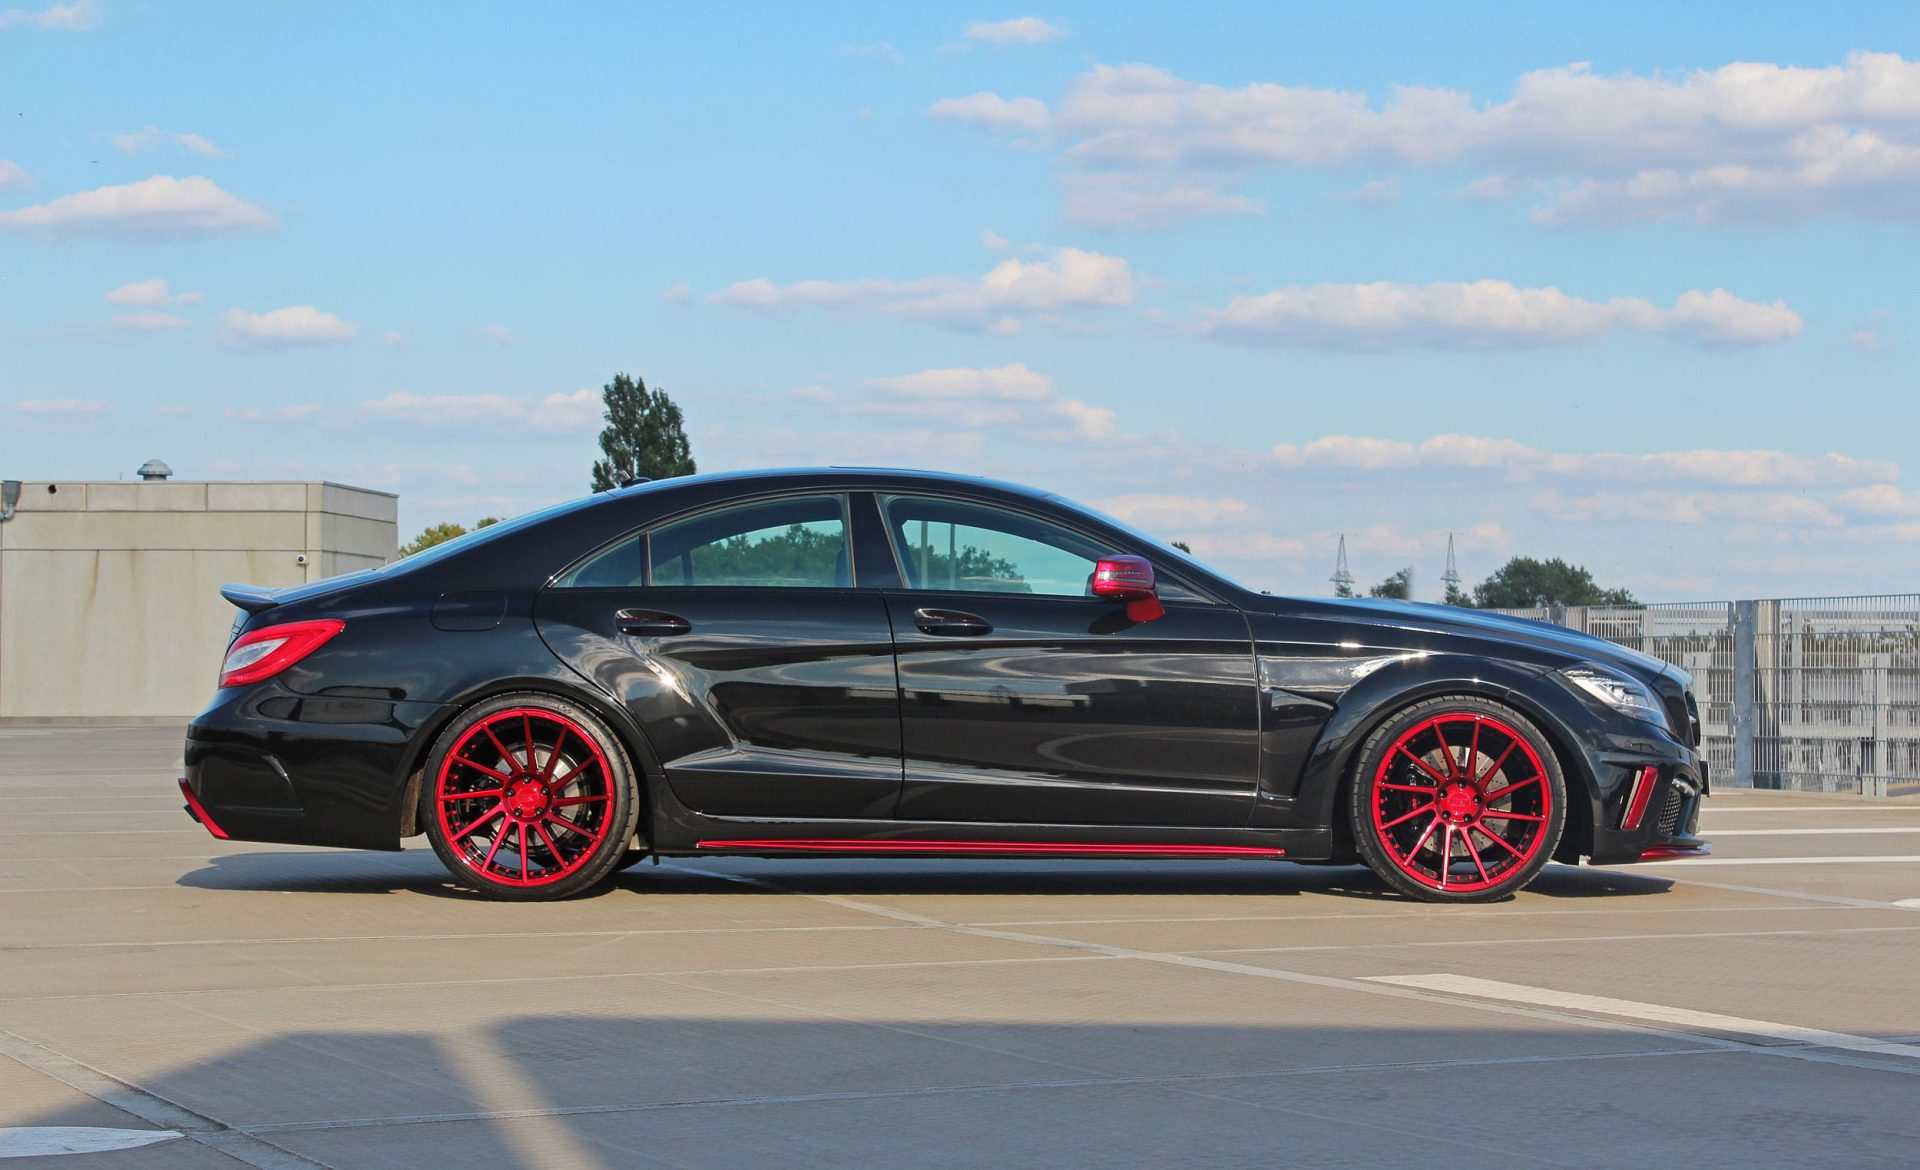 PD550 Black Edition Side Skirts for Mercedes CLS C218